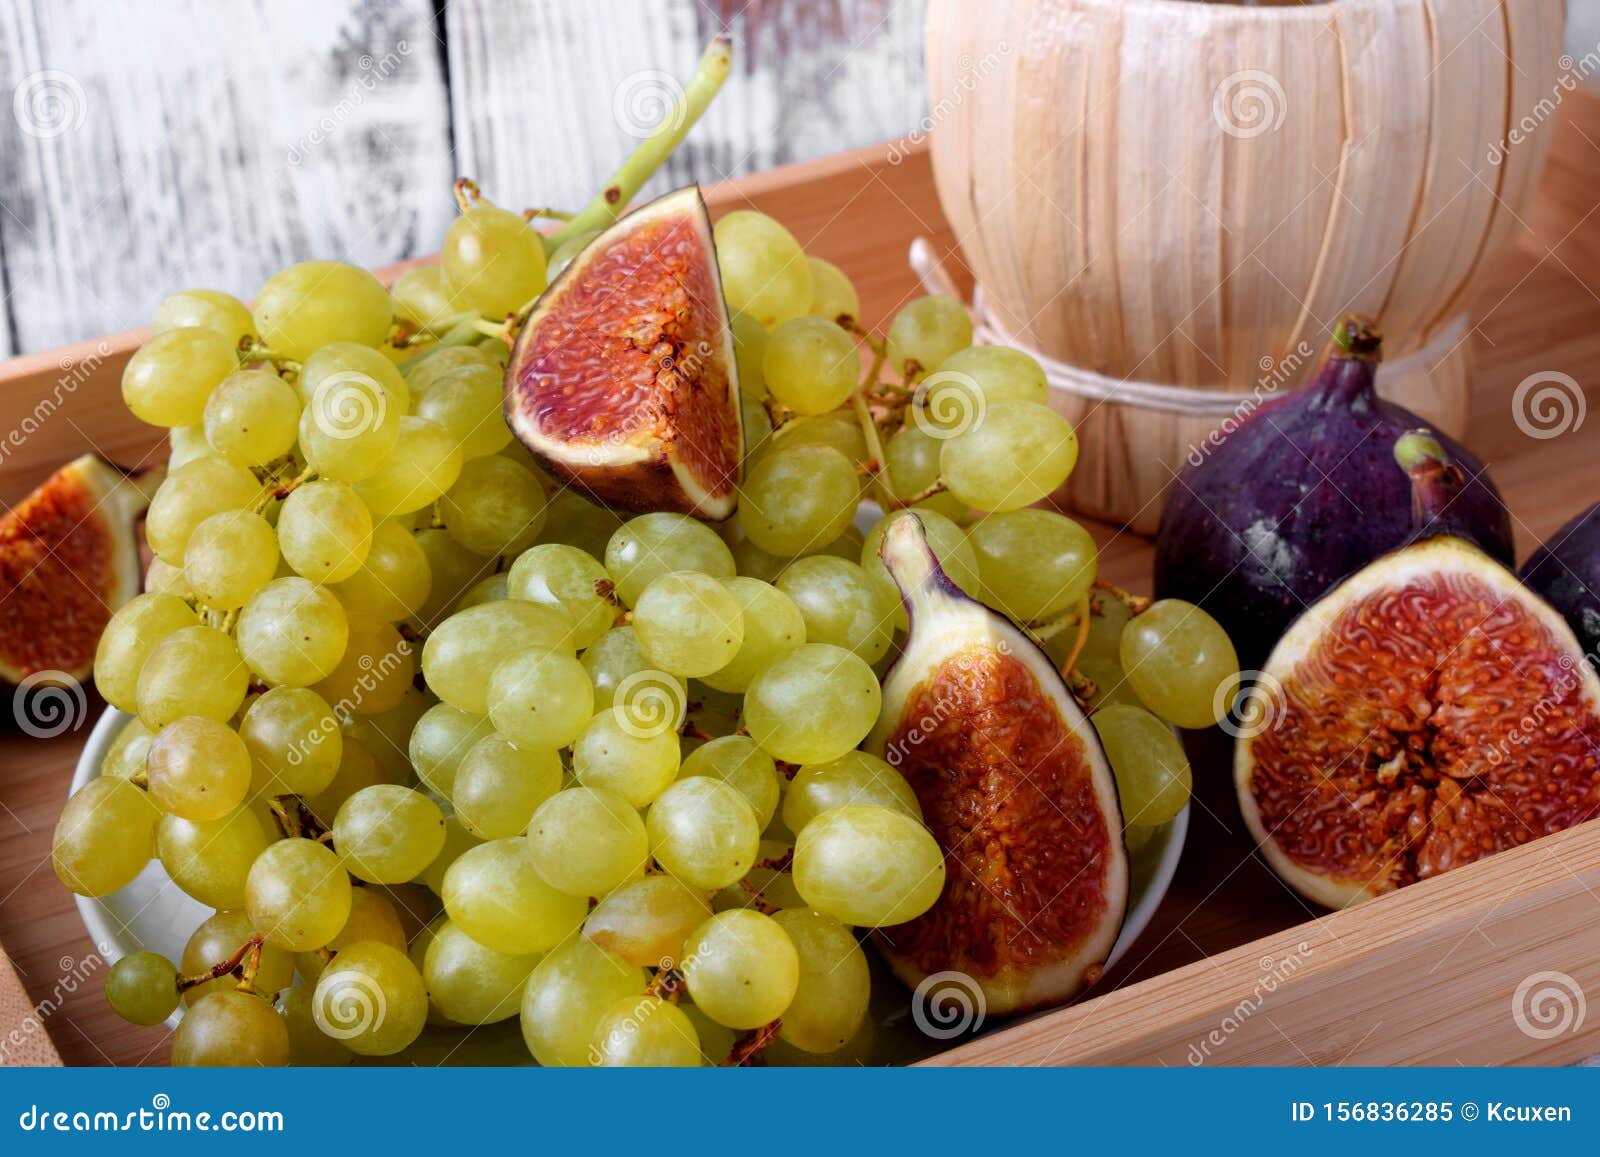 White Grapes, Figs and Italian Spirit Grappa on Wooden Tray Stock Image ...